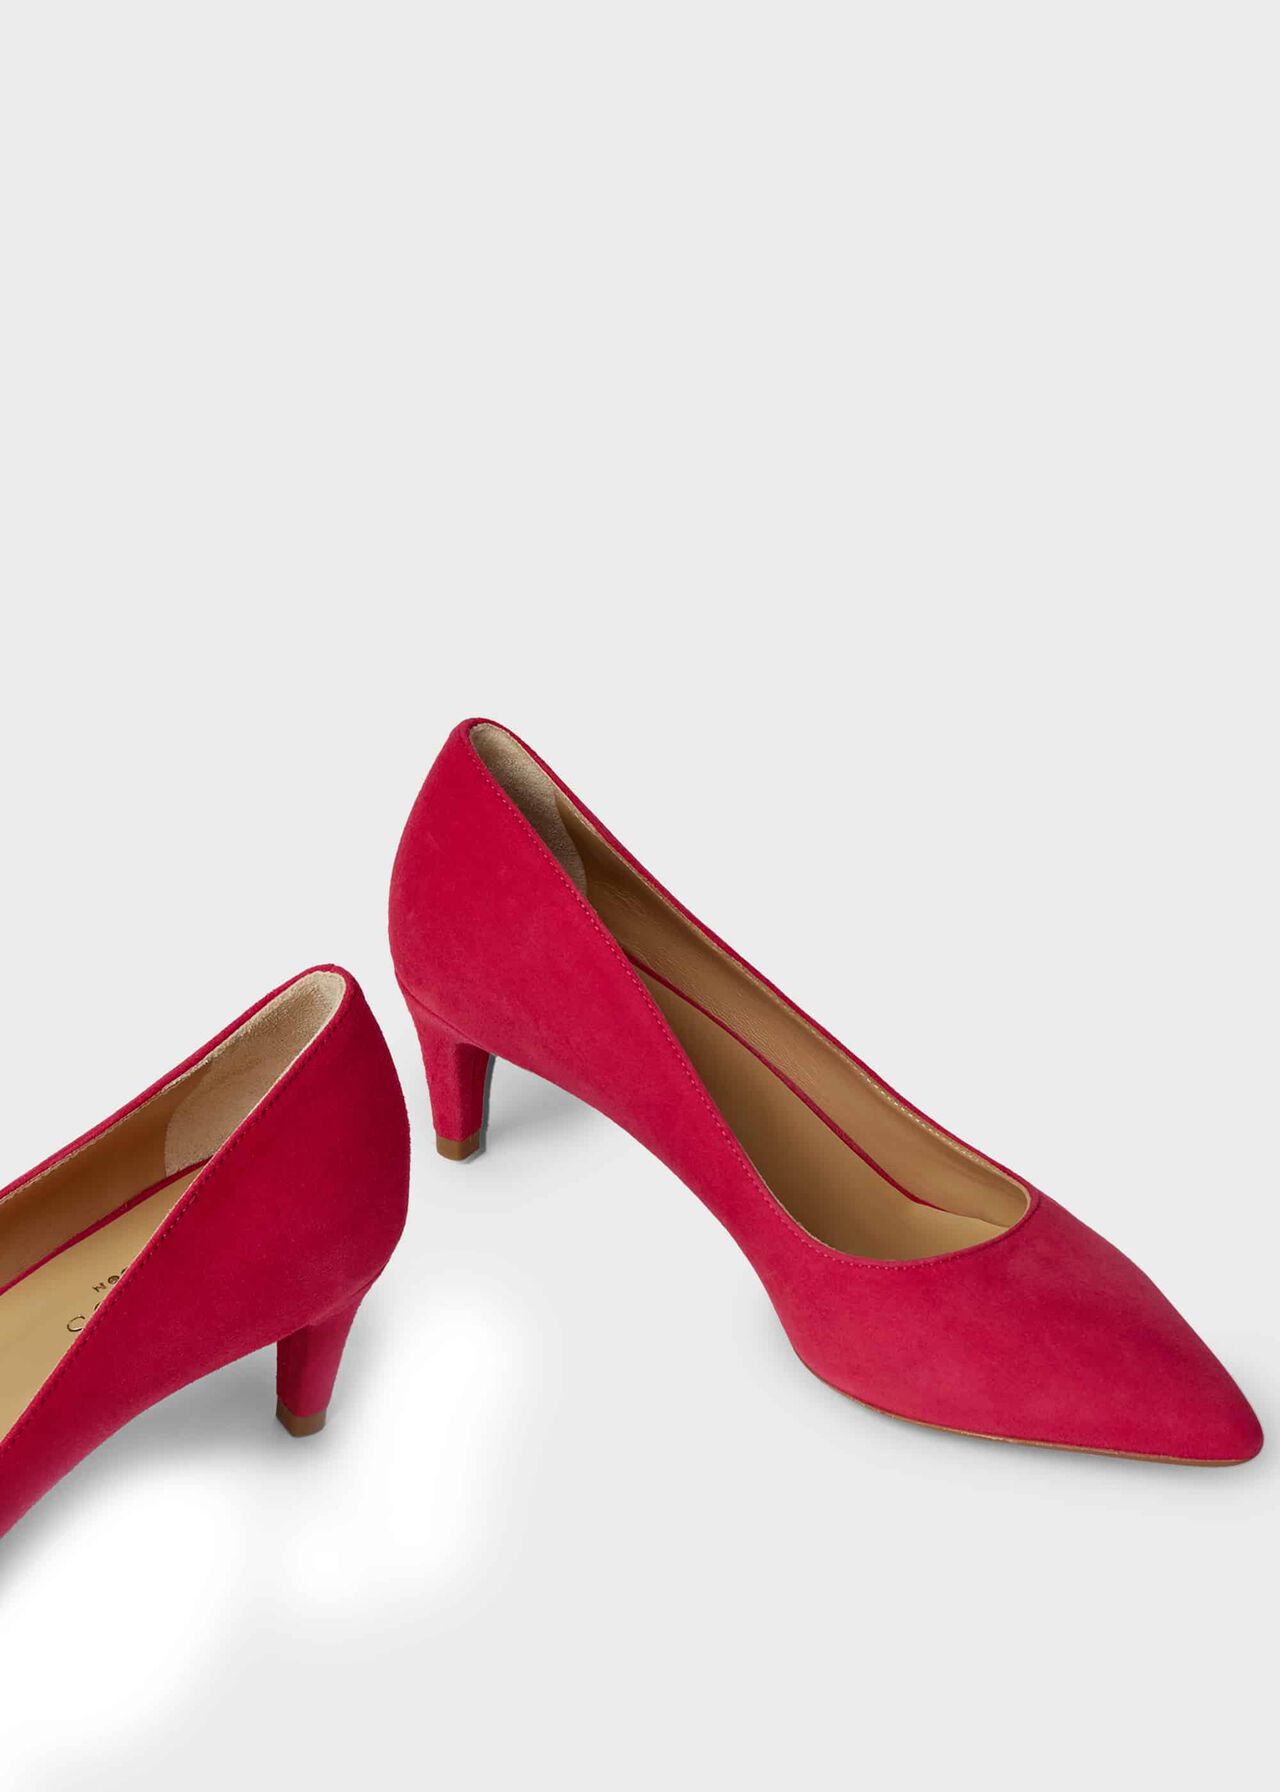 Polly Suede Kitten Heel Court Shoes, Peony, hi-res